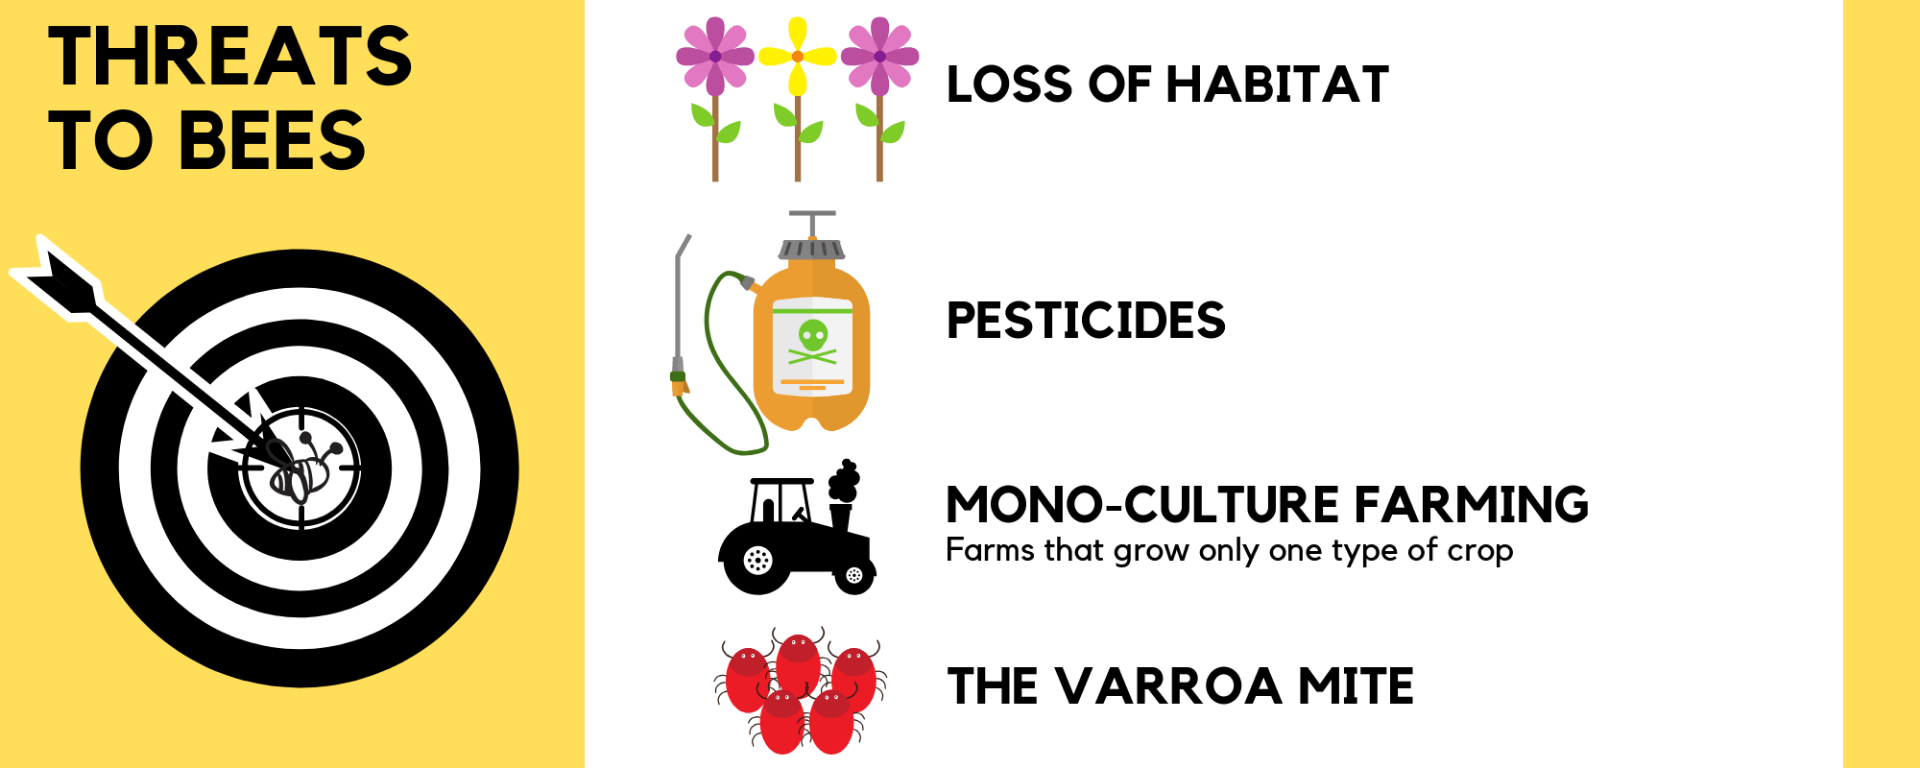 Threats to bees: Loss of habitat, pesticides, mono-culture farming (farms that grow only one type of crop), and the varroa mite